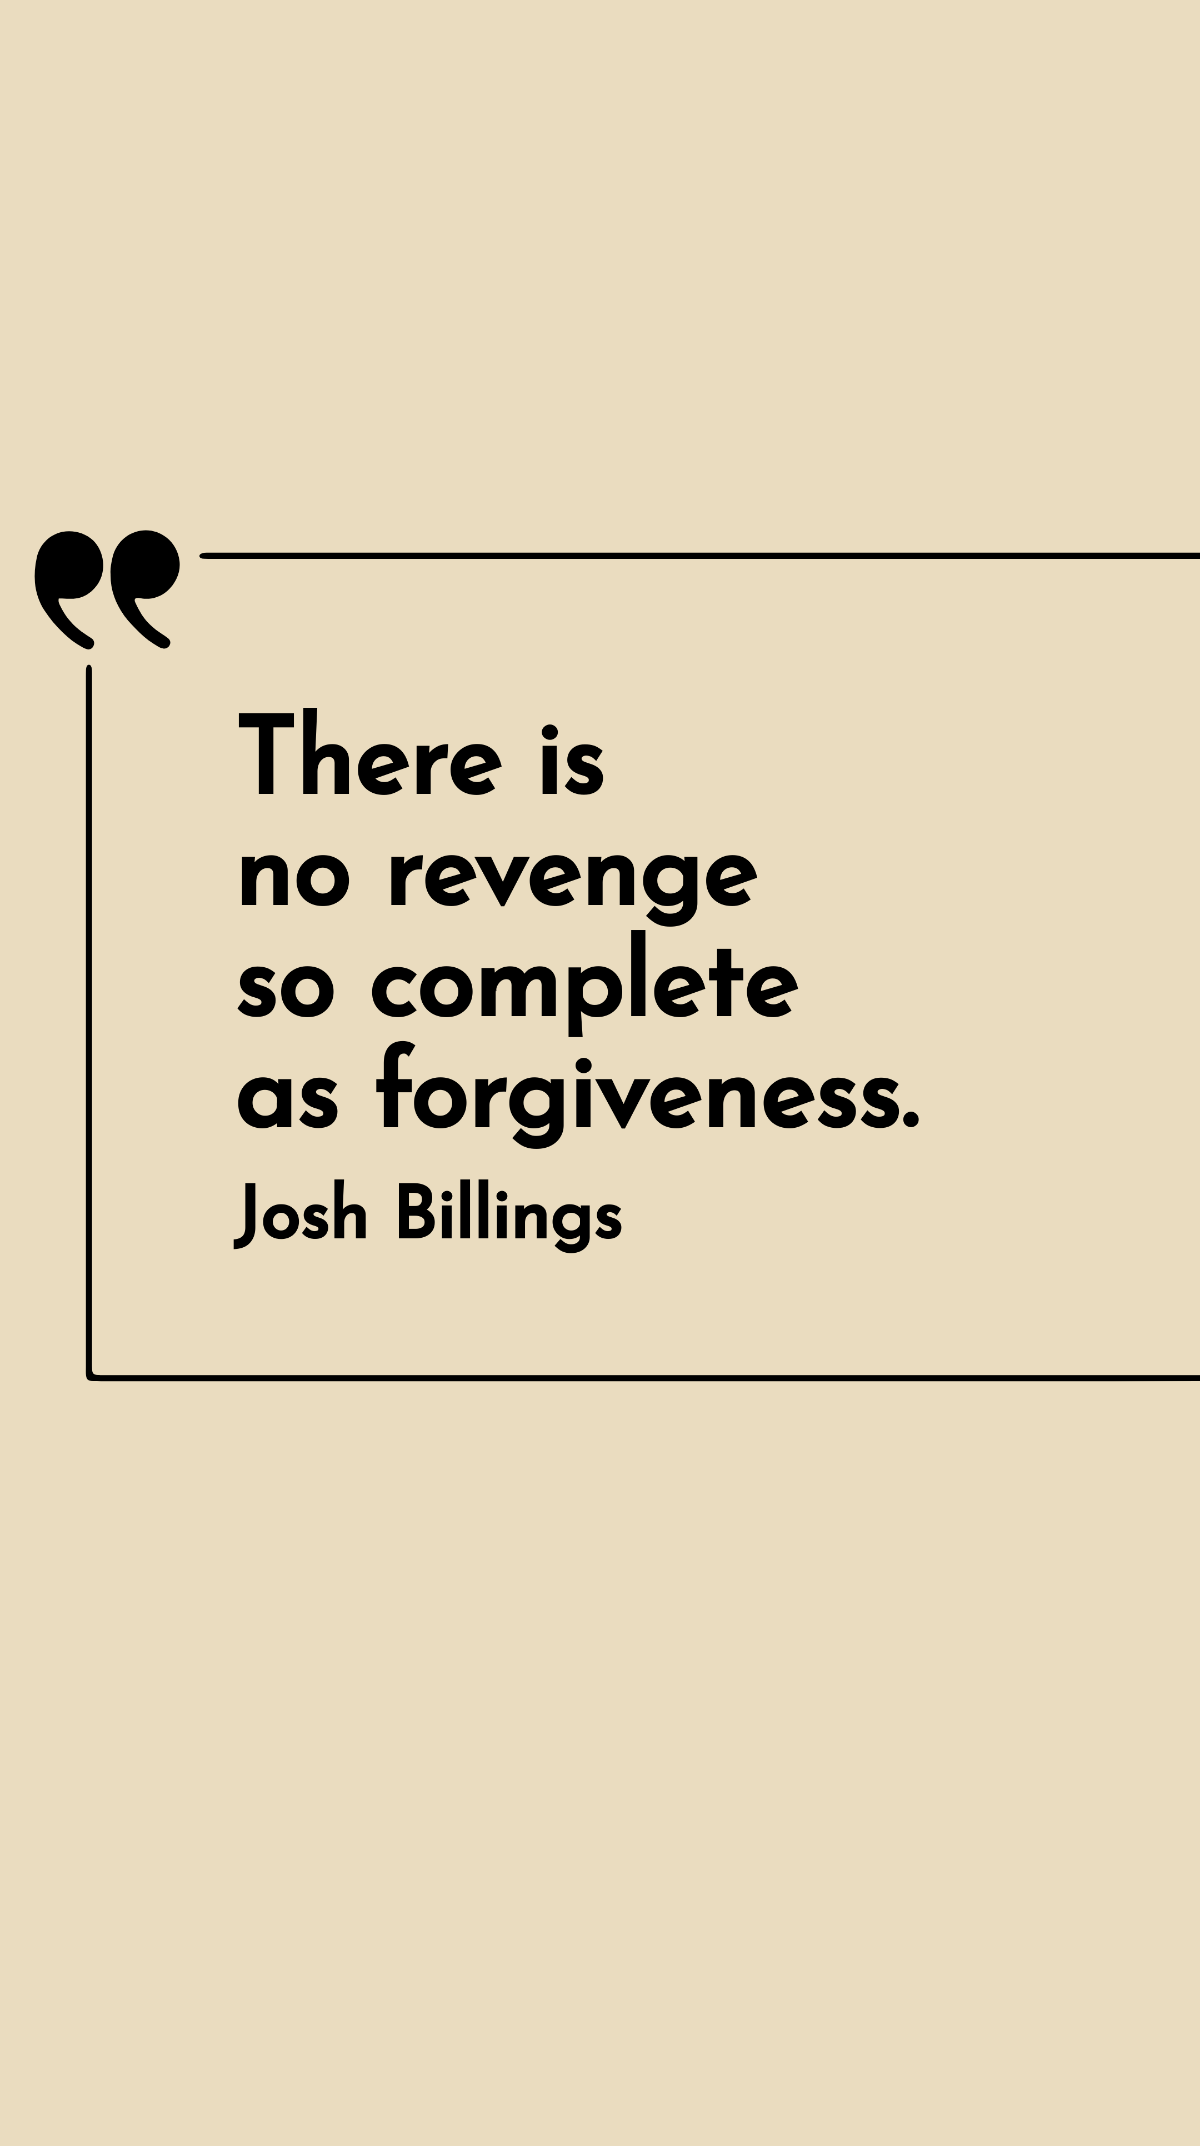 Josh Billings - There is no revenge so complete as forgiveness.